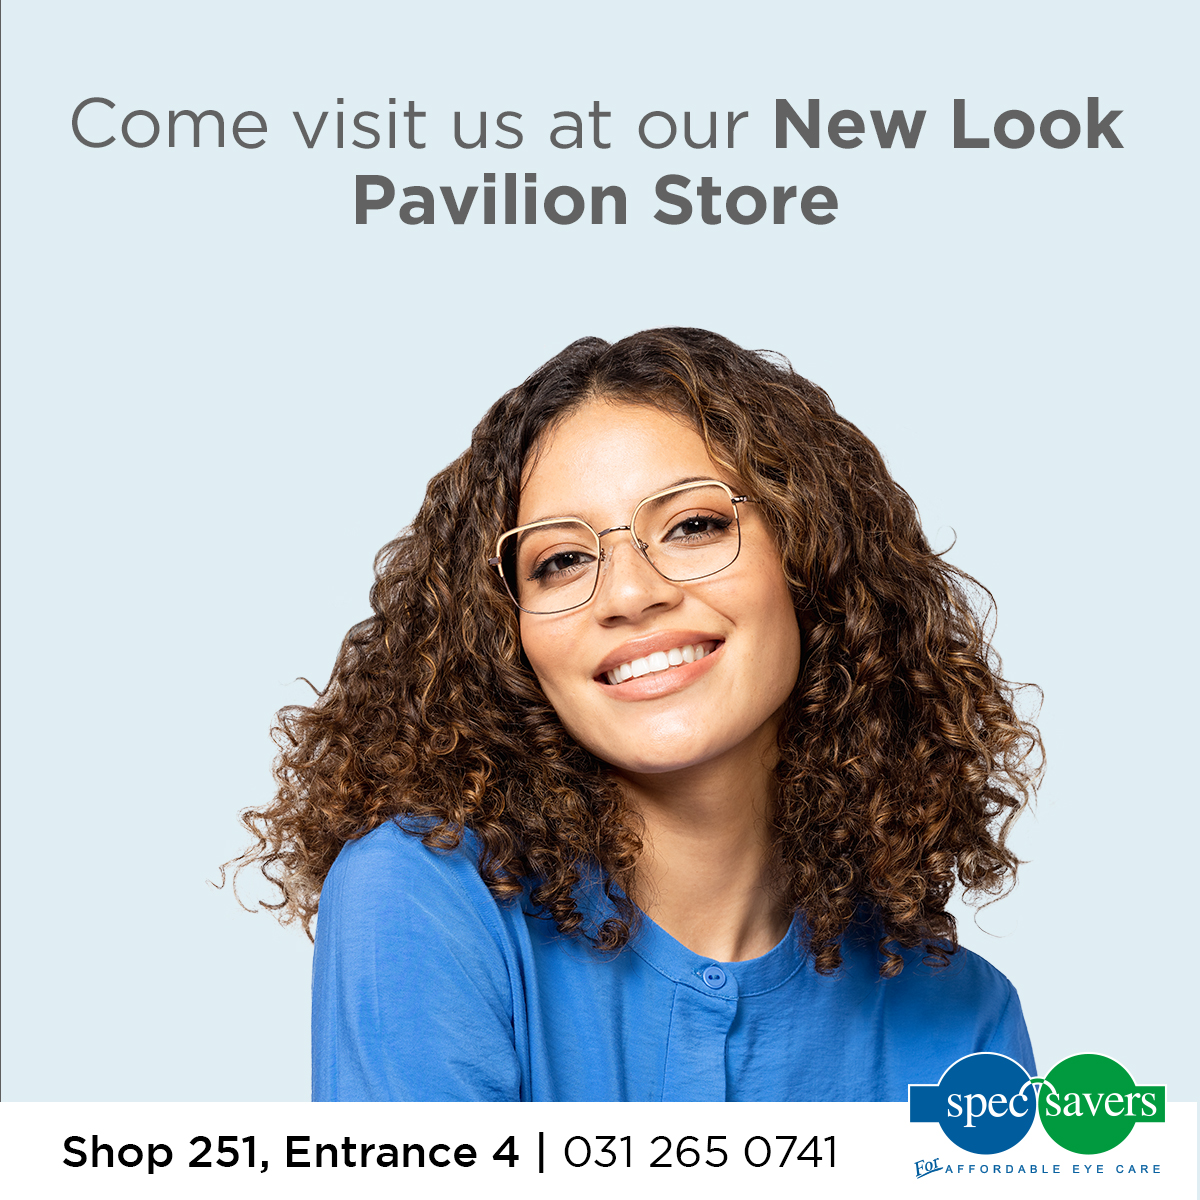 Spec-Savers Pavilion got a beautiful new look! The store will be opening on the 25th of April 2024. Pop in and book an eye test with one of their optometrists or online to enjoy the new space. #specsavers #upgradedstore #SpecSaversPavilion #storerewamp